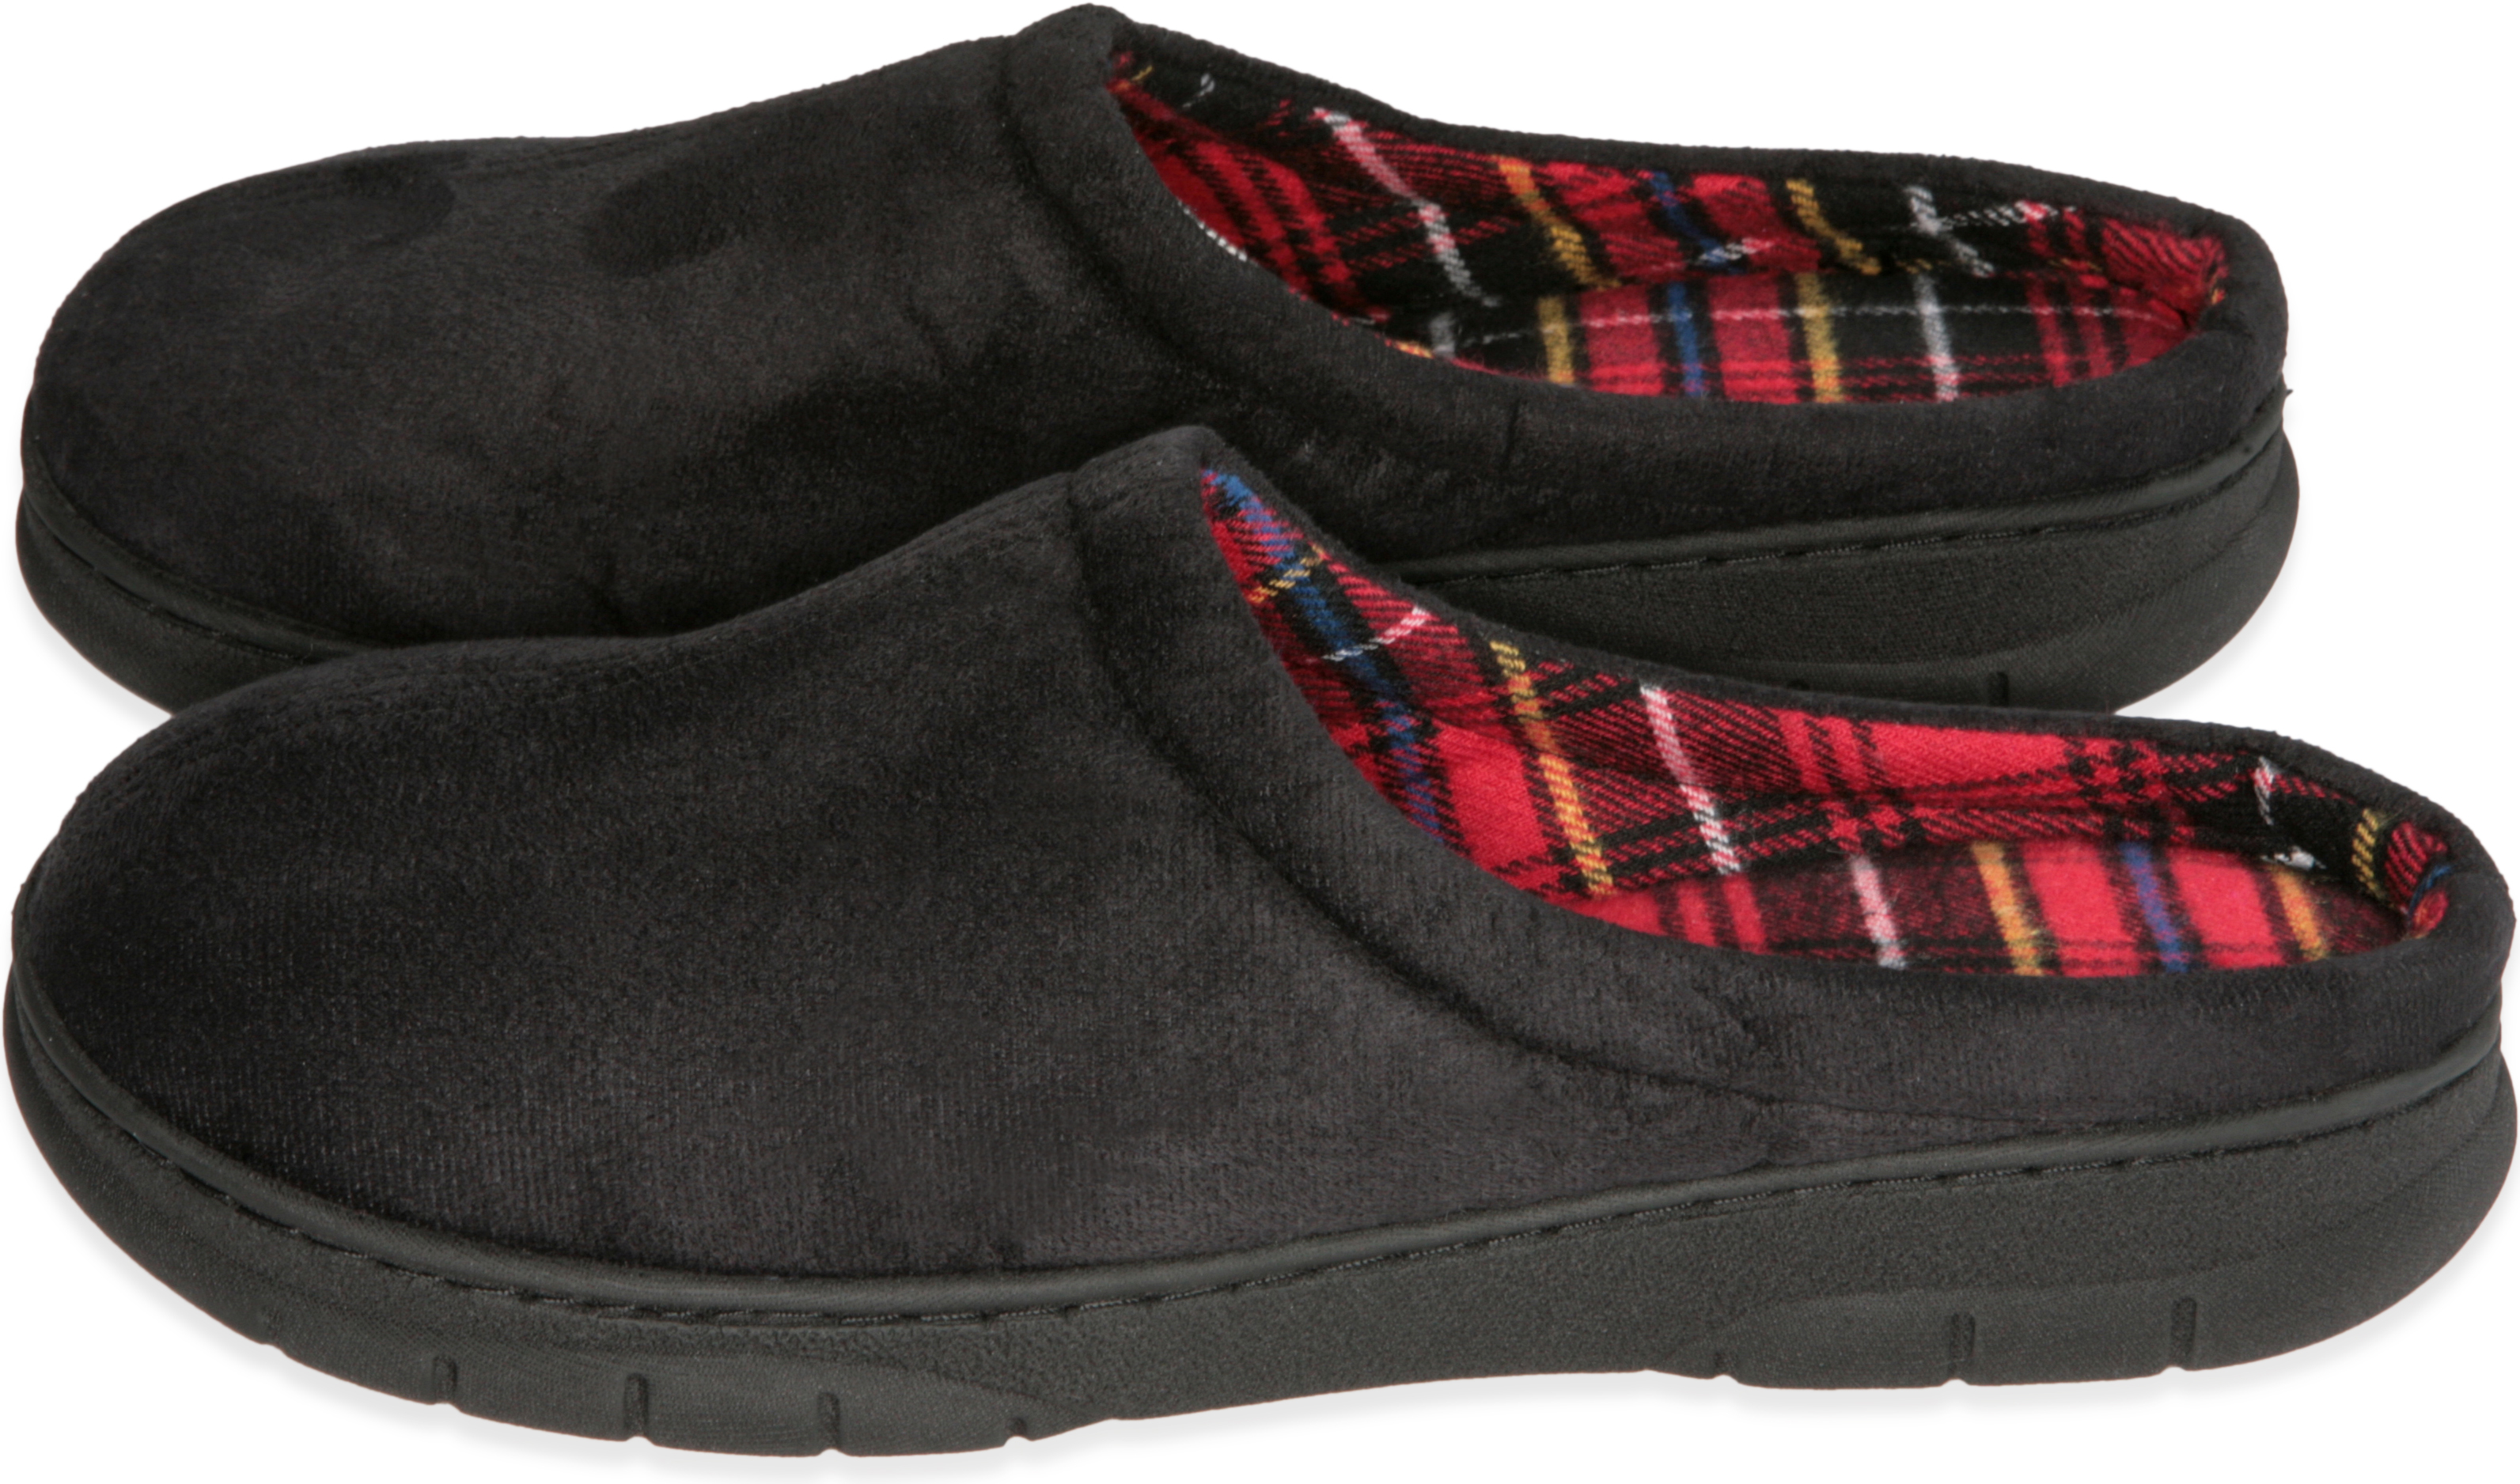 Deluxe Comfort Men's Memory Foam Slipper, Size 13-14 – Suede Vamp Checkered Lining – Memory Foam Insole – Strong TPR Outsole – Men's Slippers, Black Suede - image 2 of 5